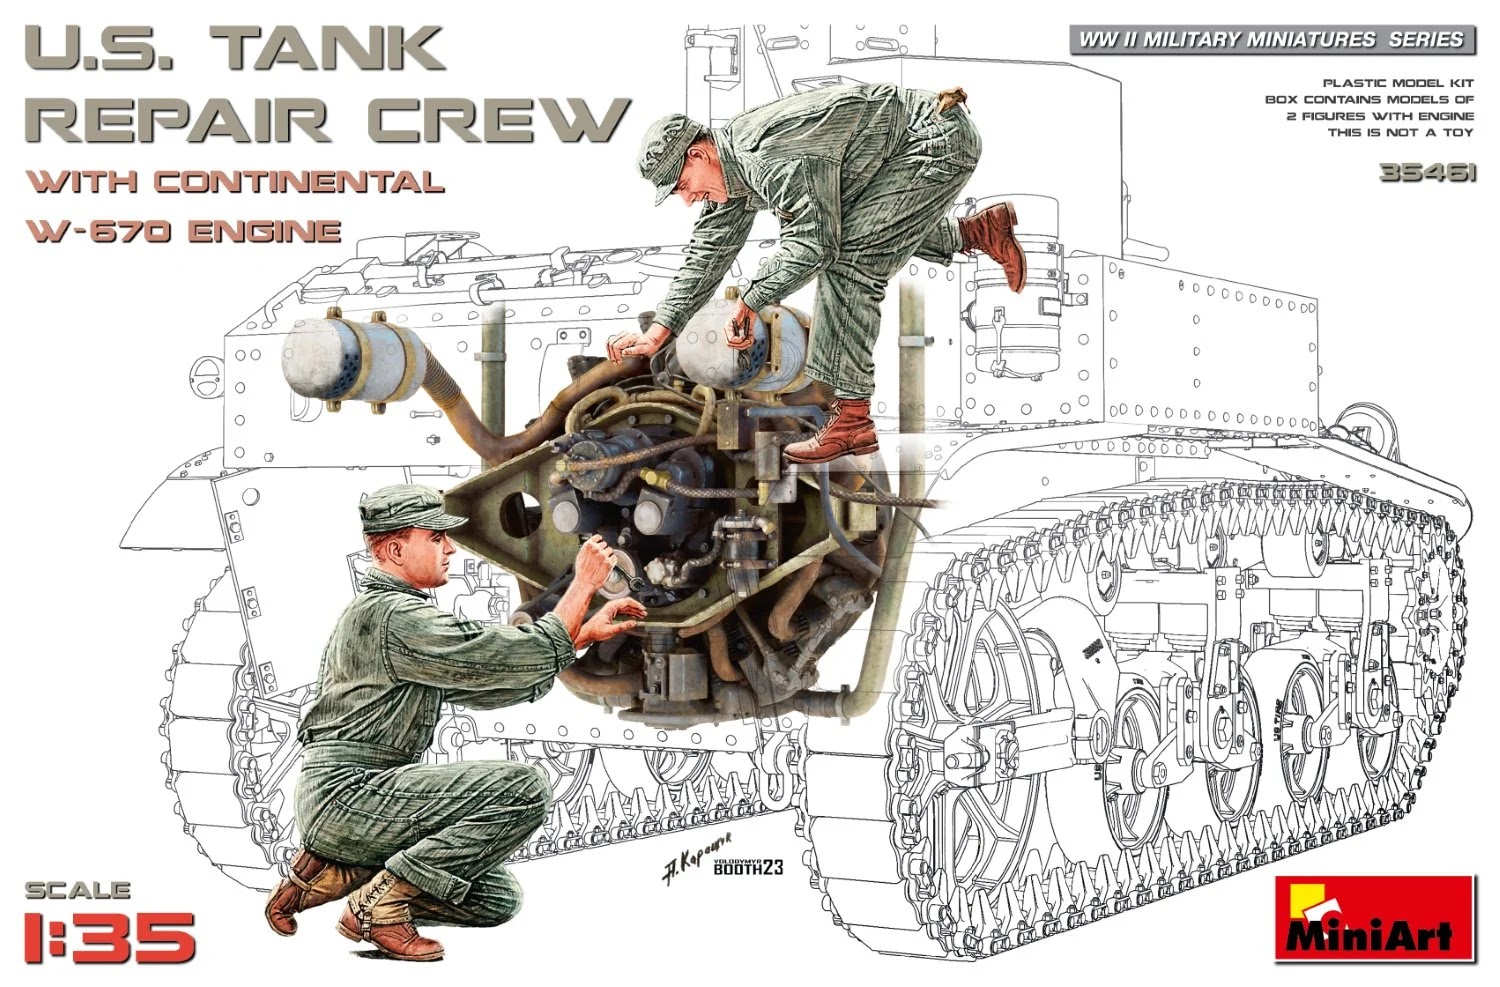 The Modelling News: Preview: MiniArt's 1/35 US Tank Repair Crew